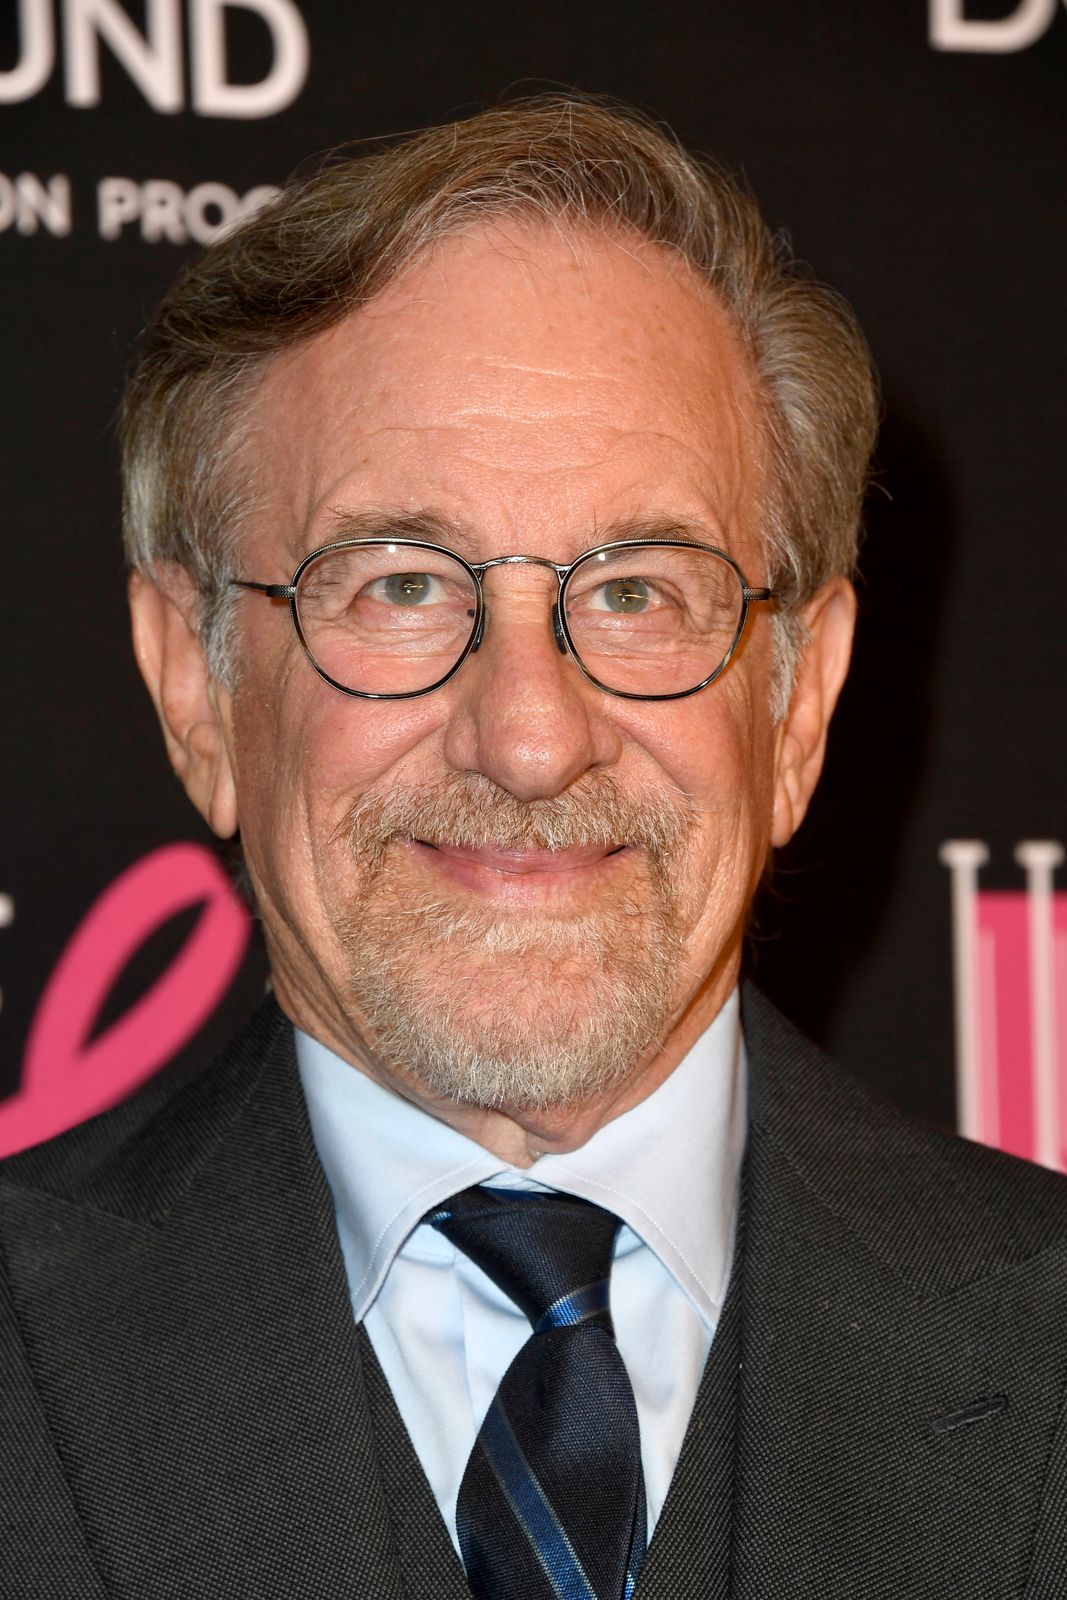 Steven Spielberg at The Women's Cancer Research Fund's An Unforgettable Evening Benefit Gala on February 28, 2019, in Beverly Hills, California | Photo: Frazer Harrison/Getty Images